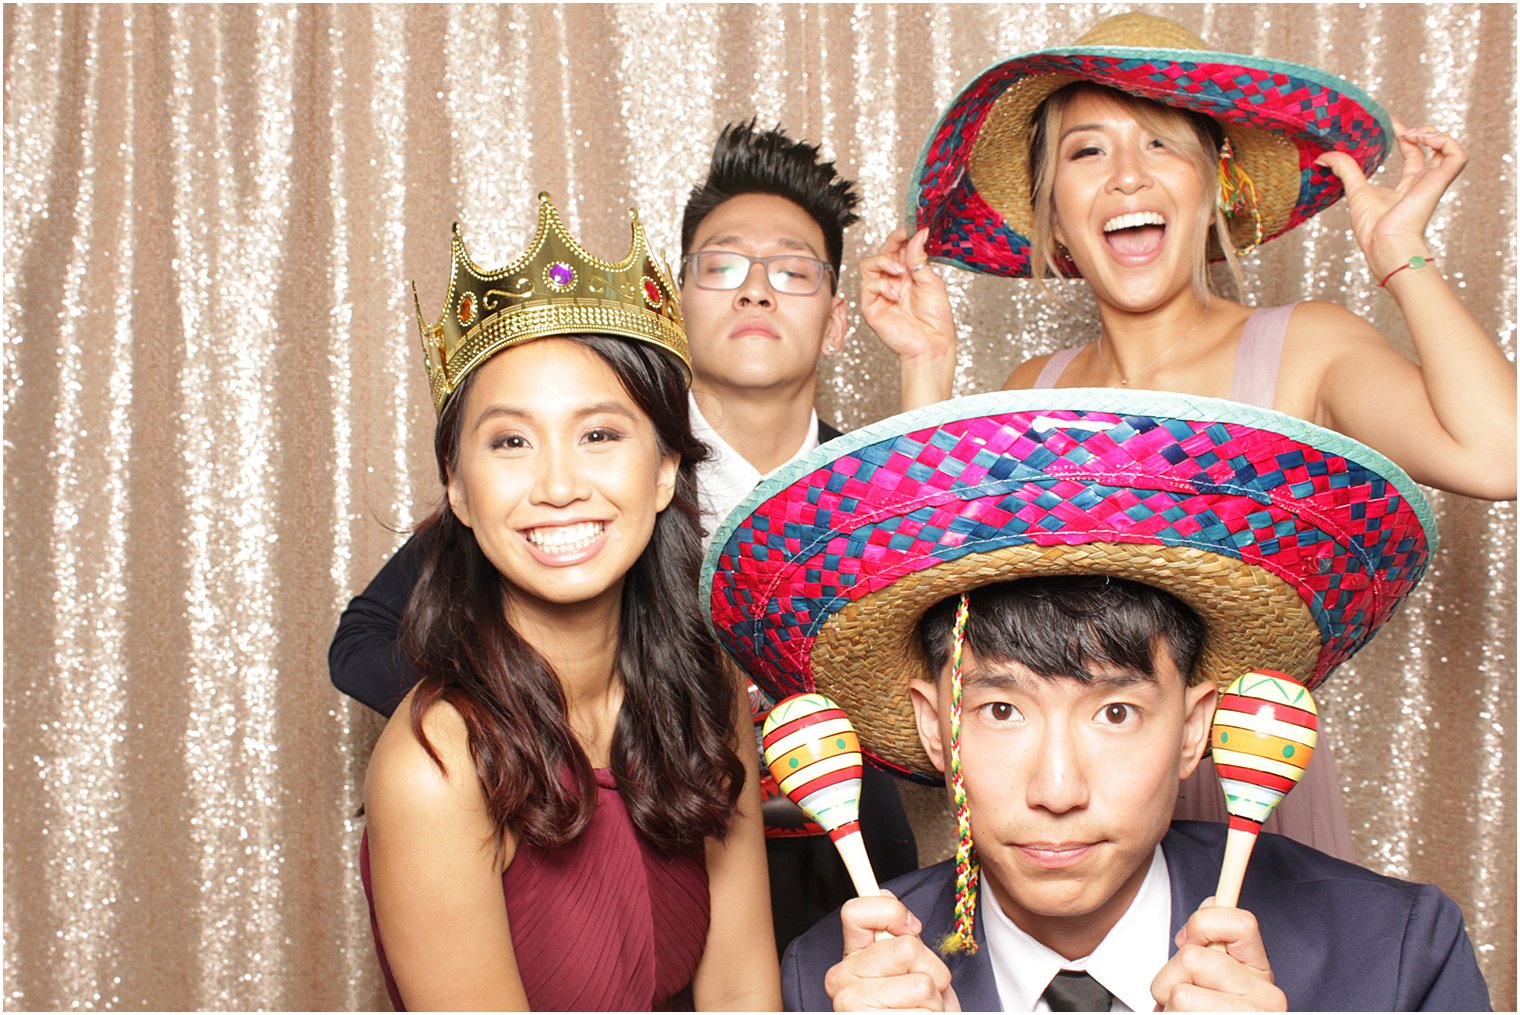 photo booth fun with sombreros and maracas